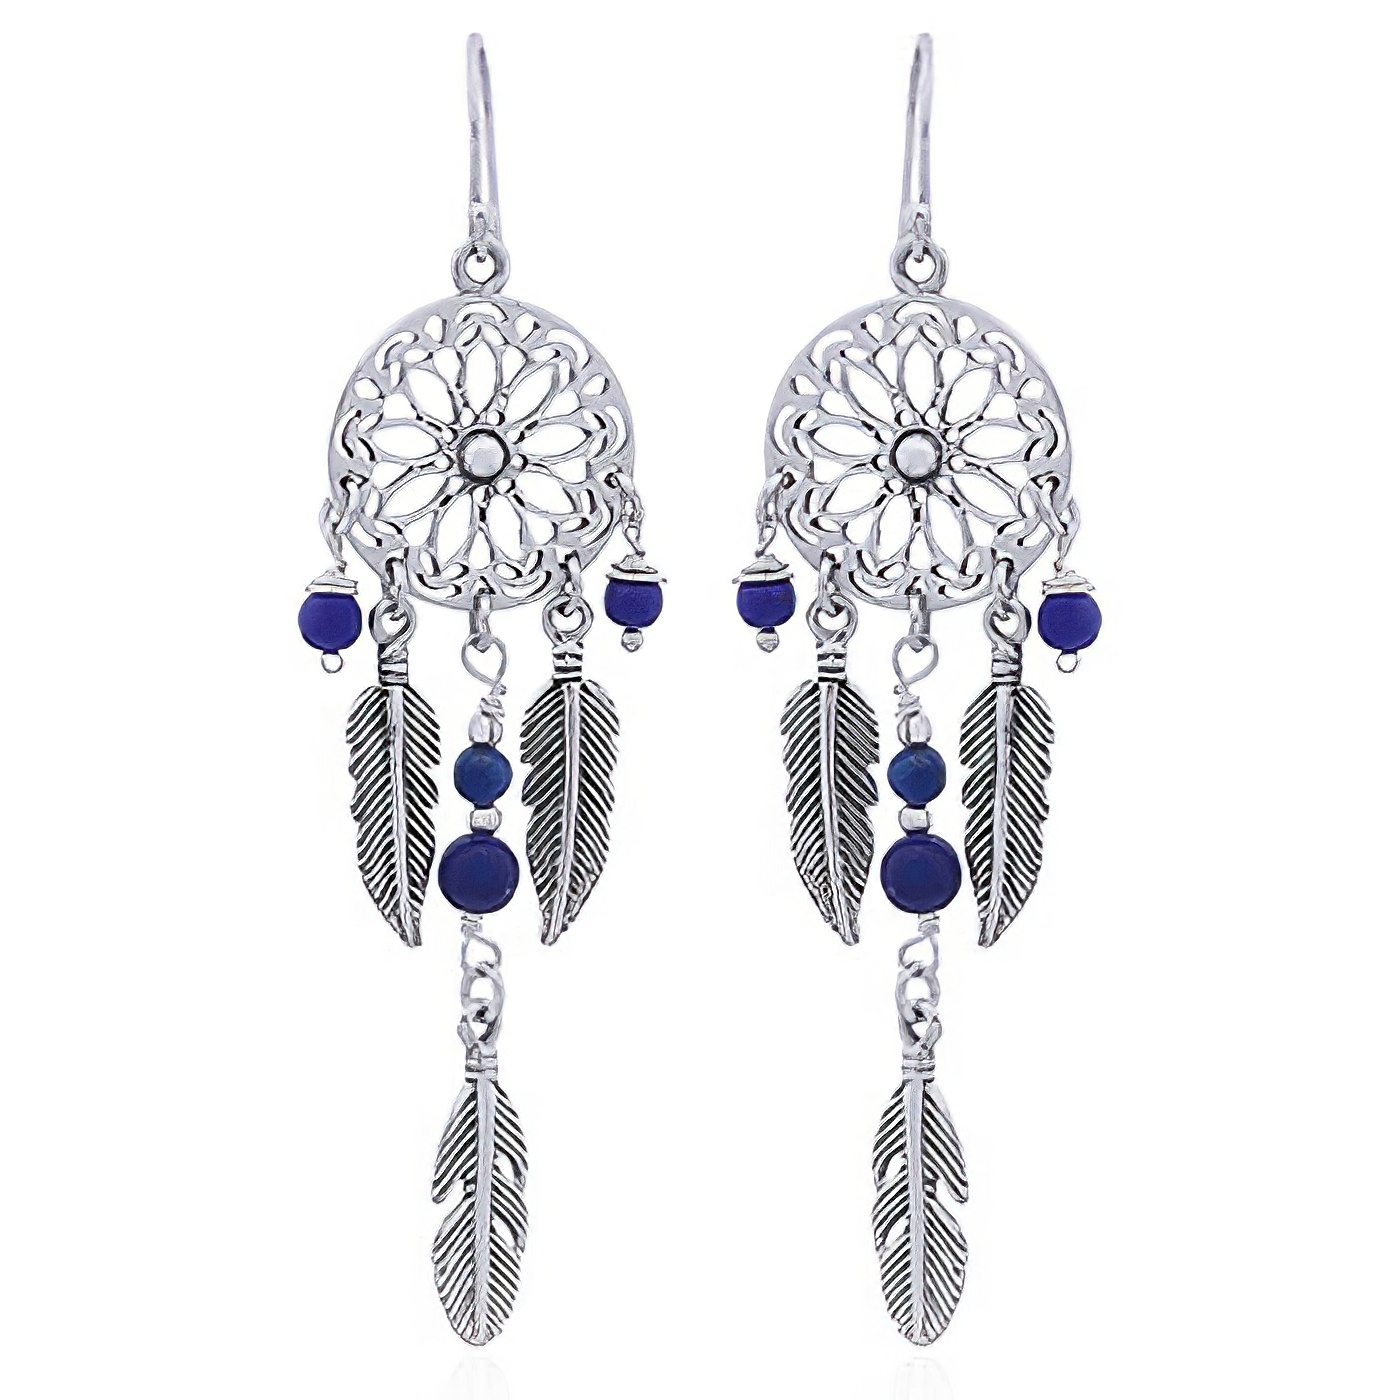 Silver and Lapis Lazuli Dream Catcher Earrings by BeYindi 